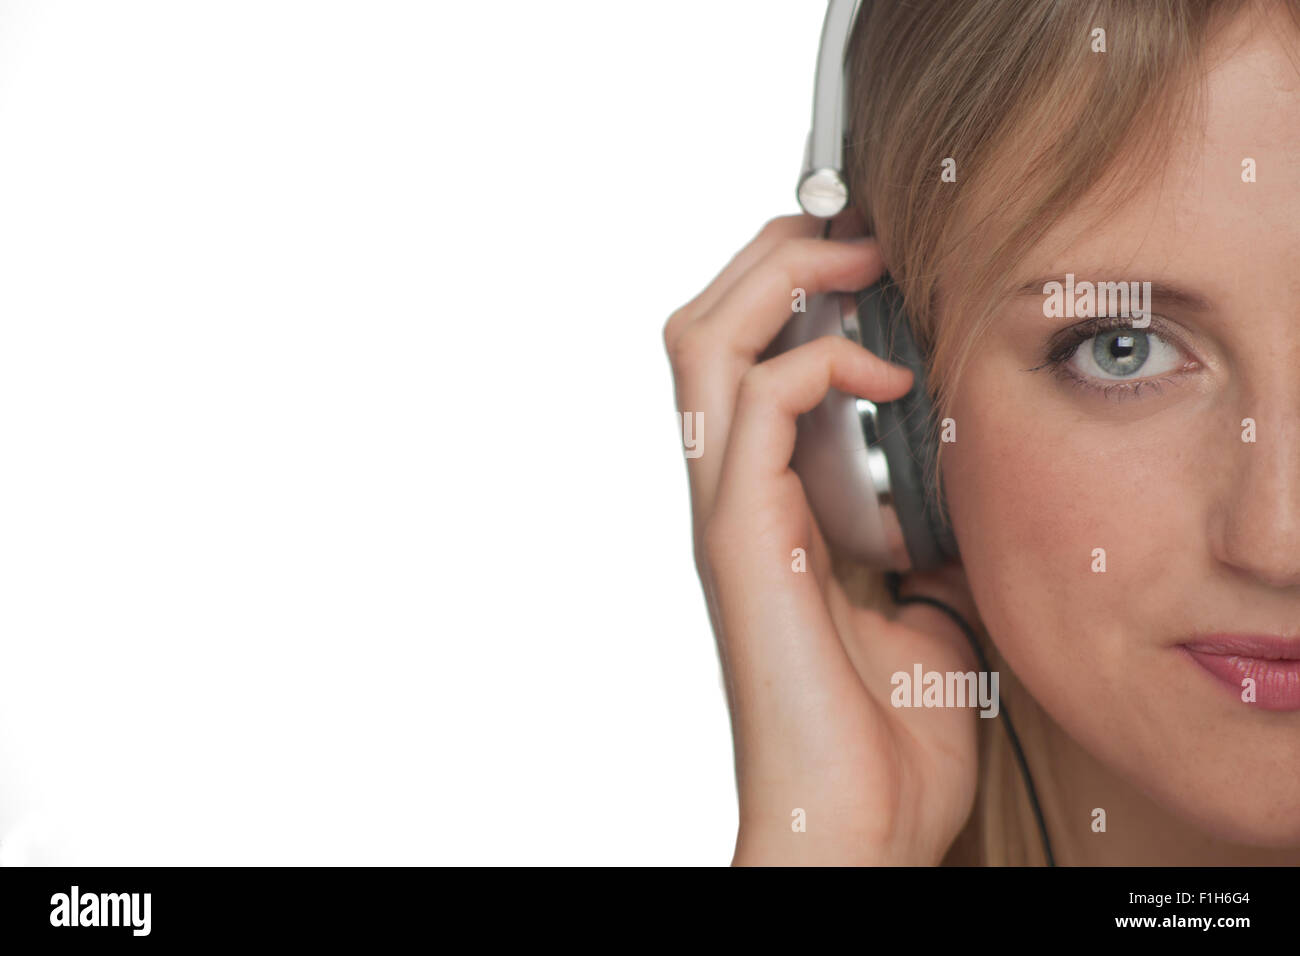 Woman wearing headphones listening to music Banque D'Images